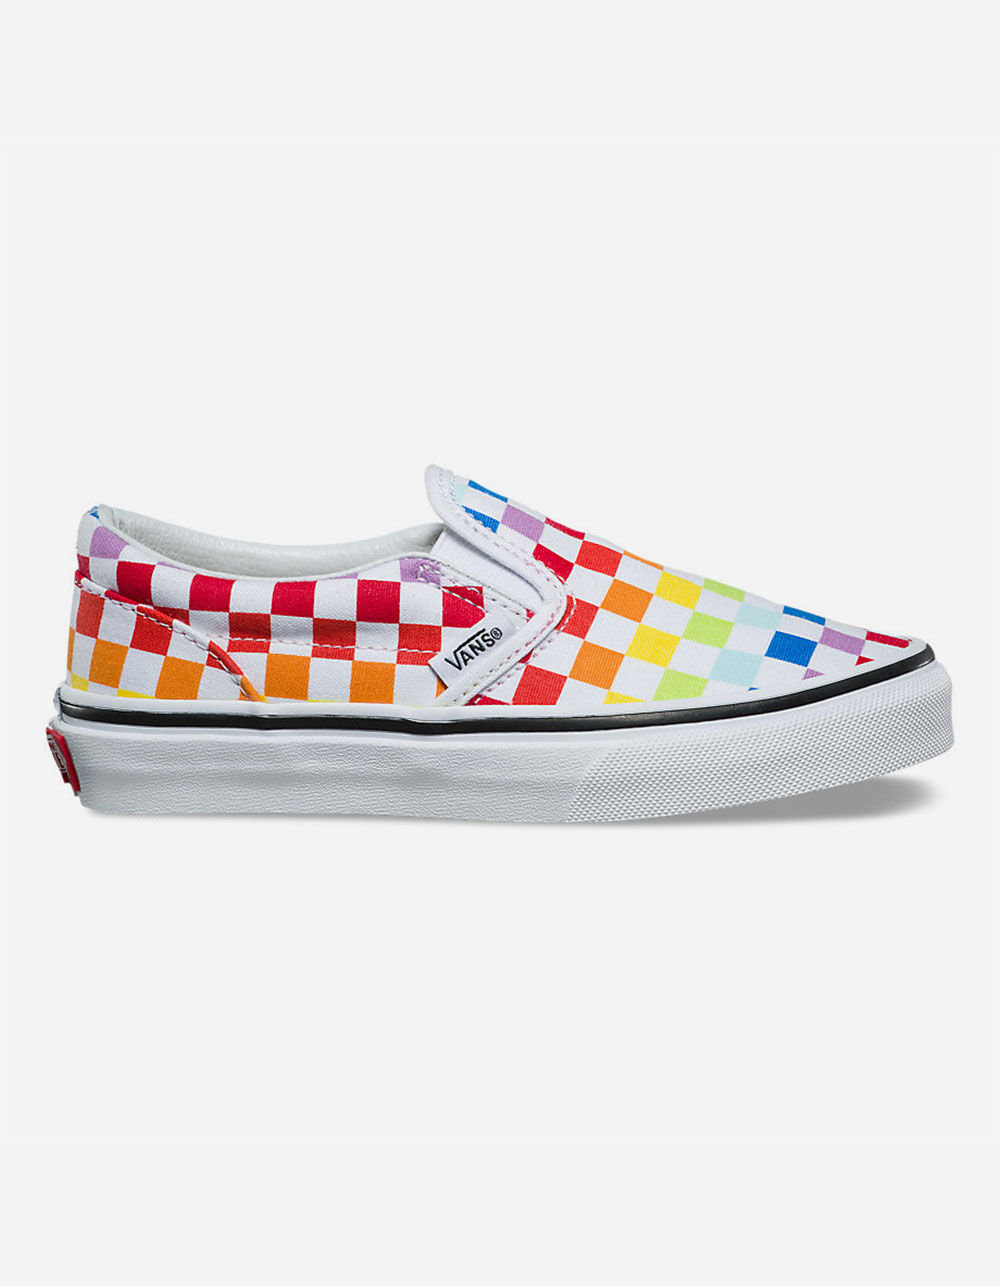 Rainbow Vans For Toddlers | lupon.gov.ph